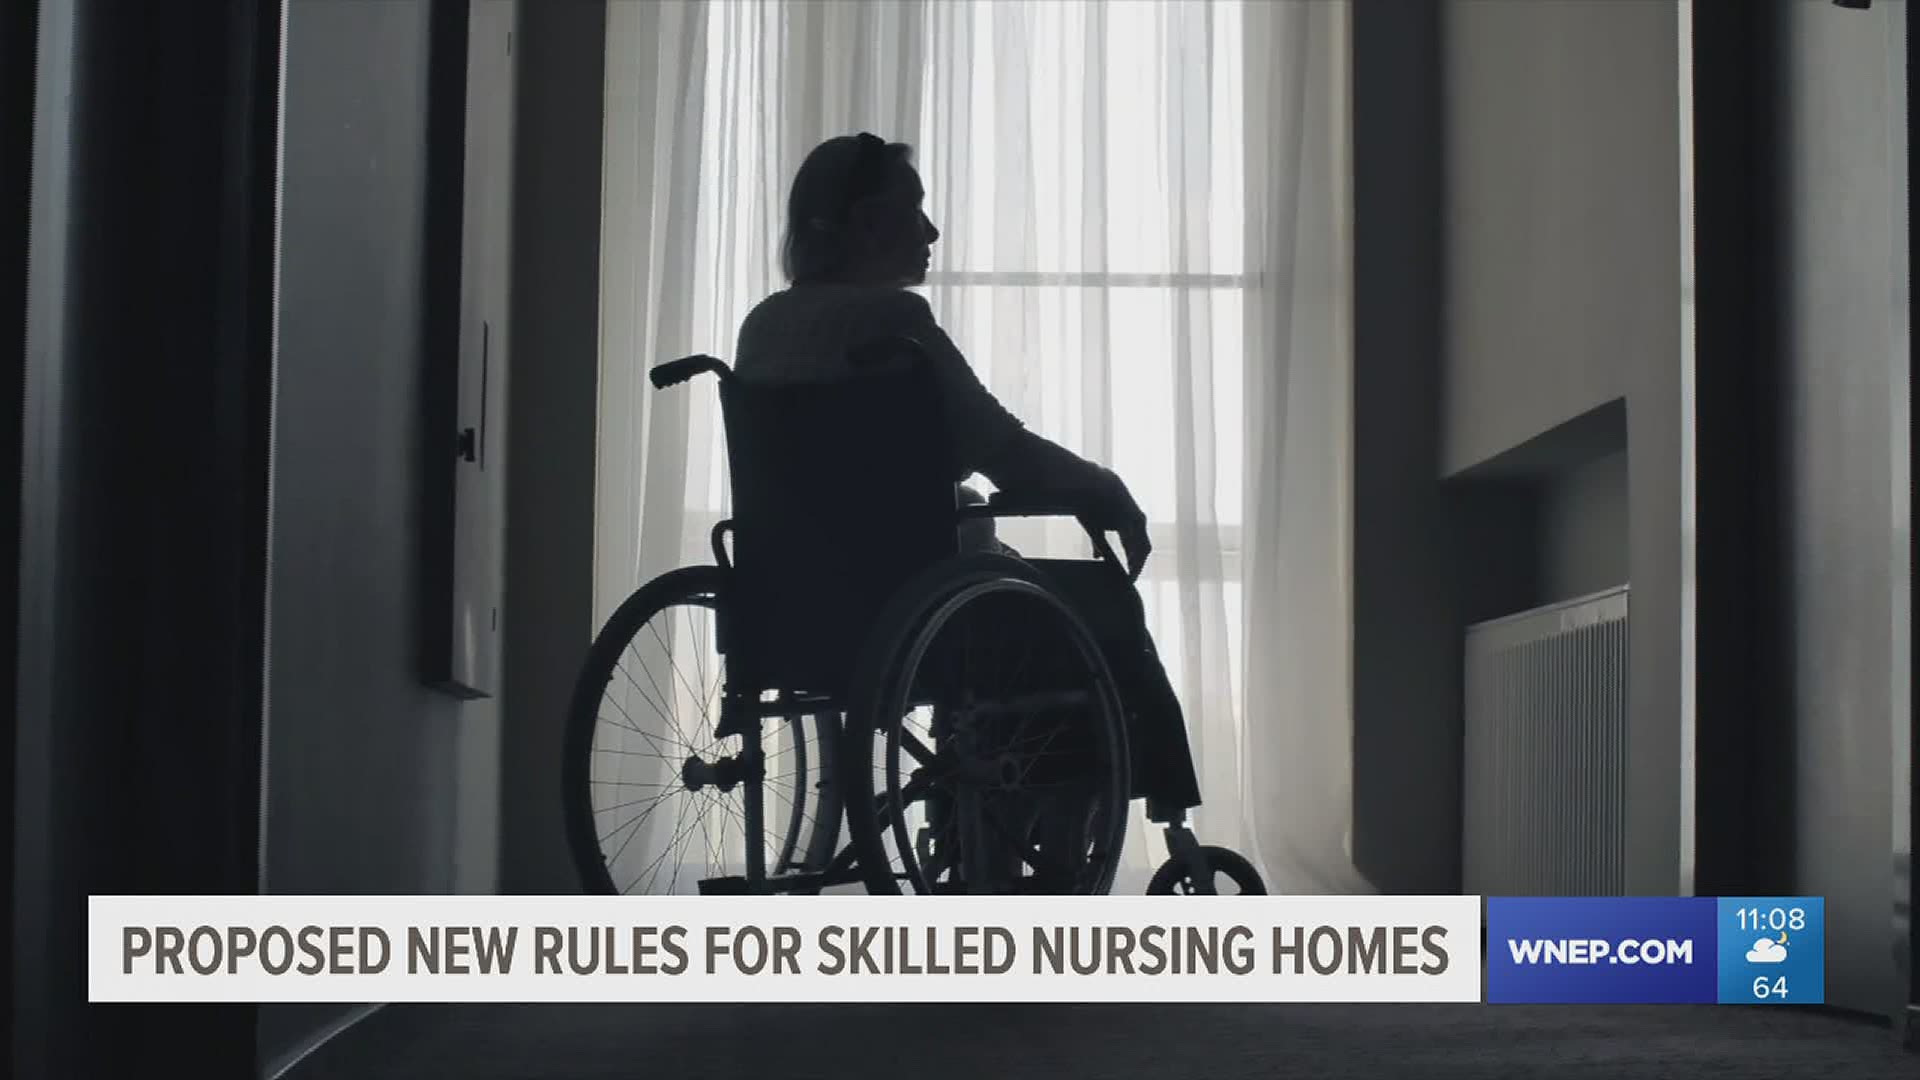 It's been more than 20 years since regulations on nursing facilities in the state were updated. Now, the Wolf administration has announced proposed changes.